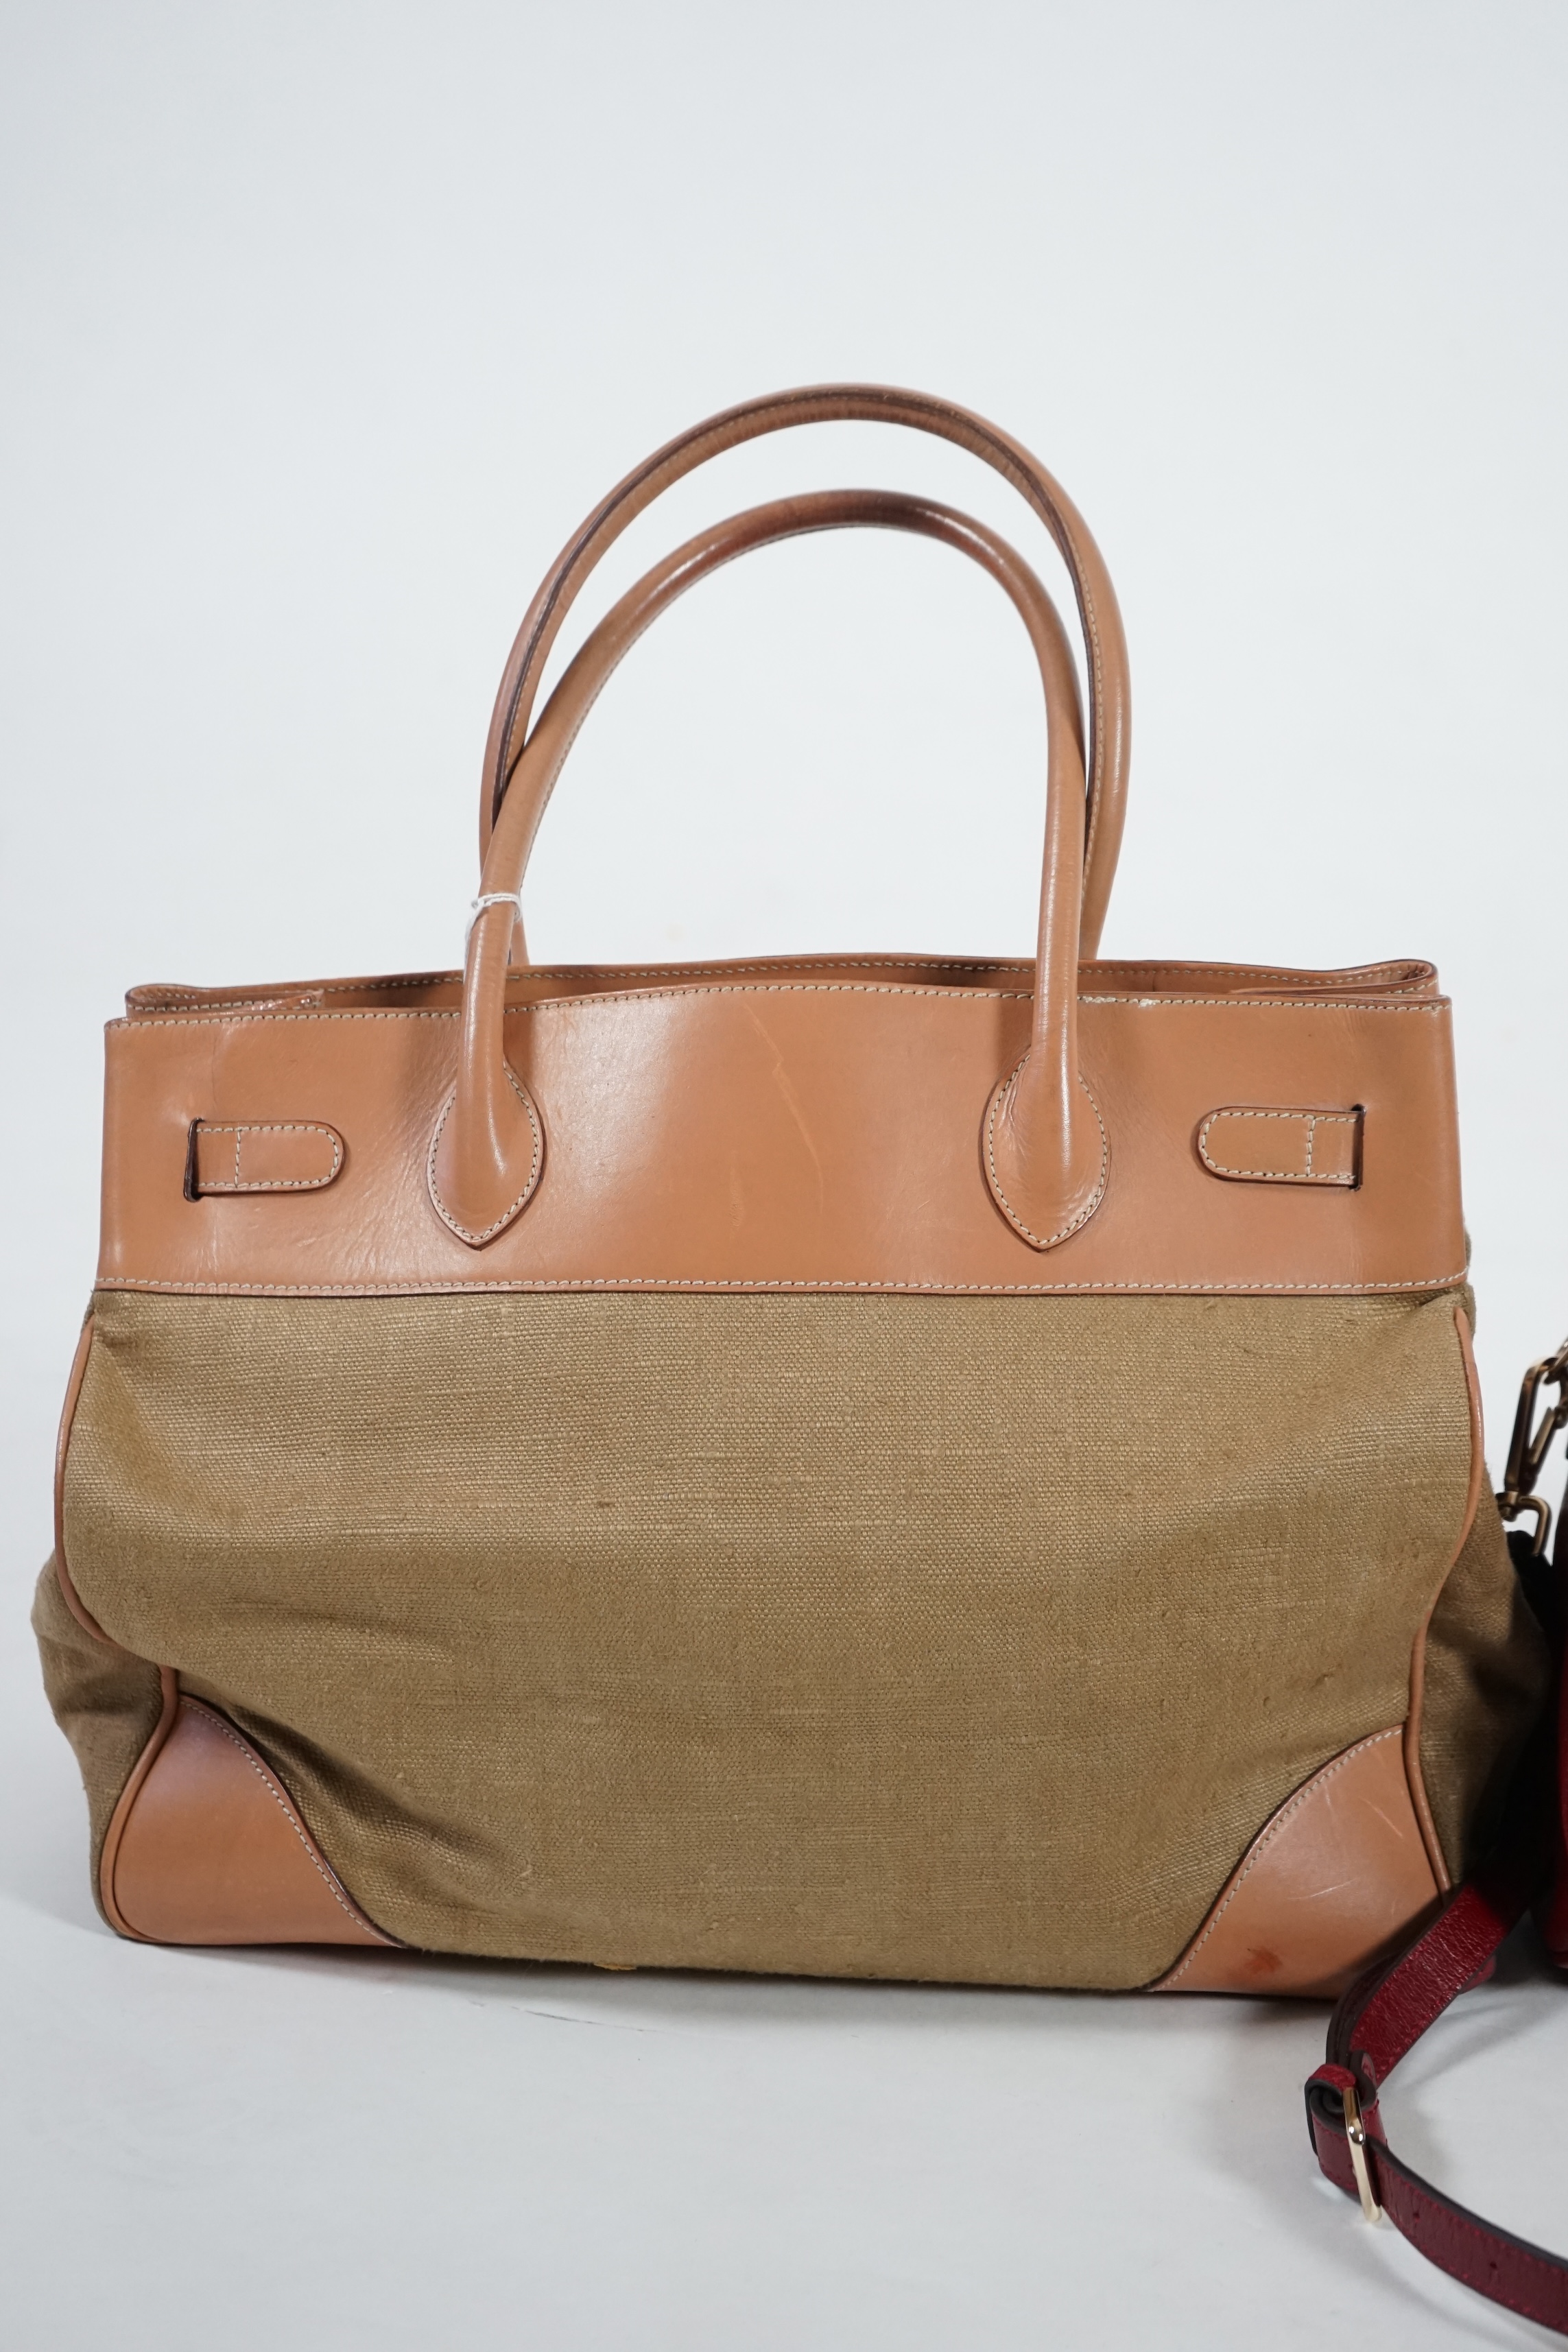 Two Maria Carla handbags and a Piertucci light tan canvas and leather bag. Proceeds to Happy Paws Puppy Rescue